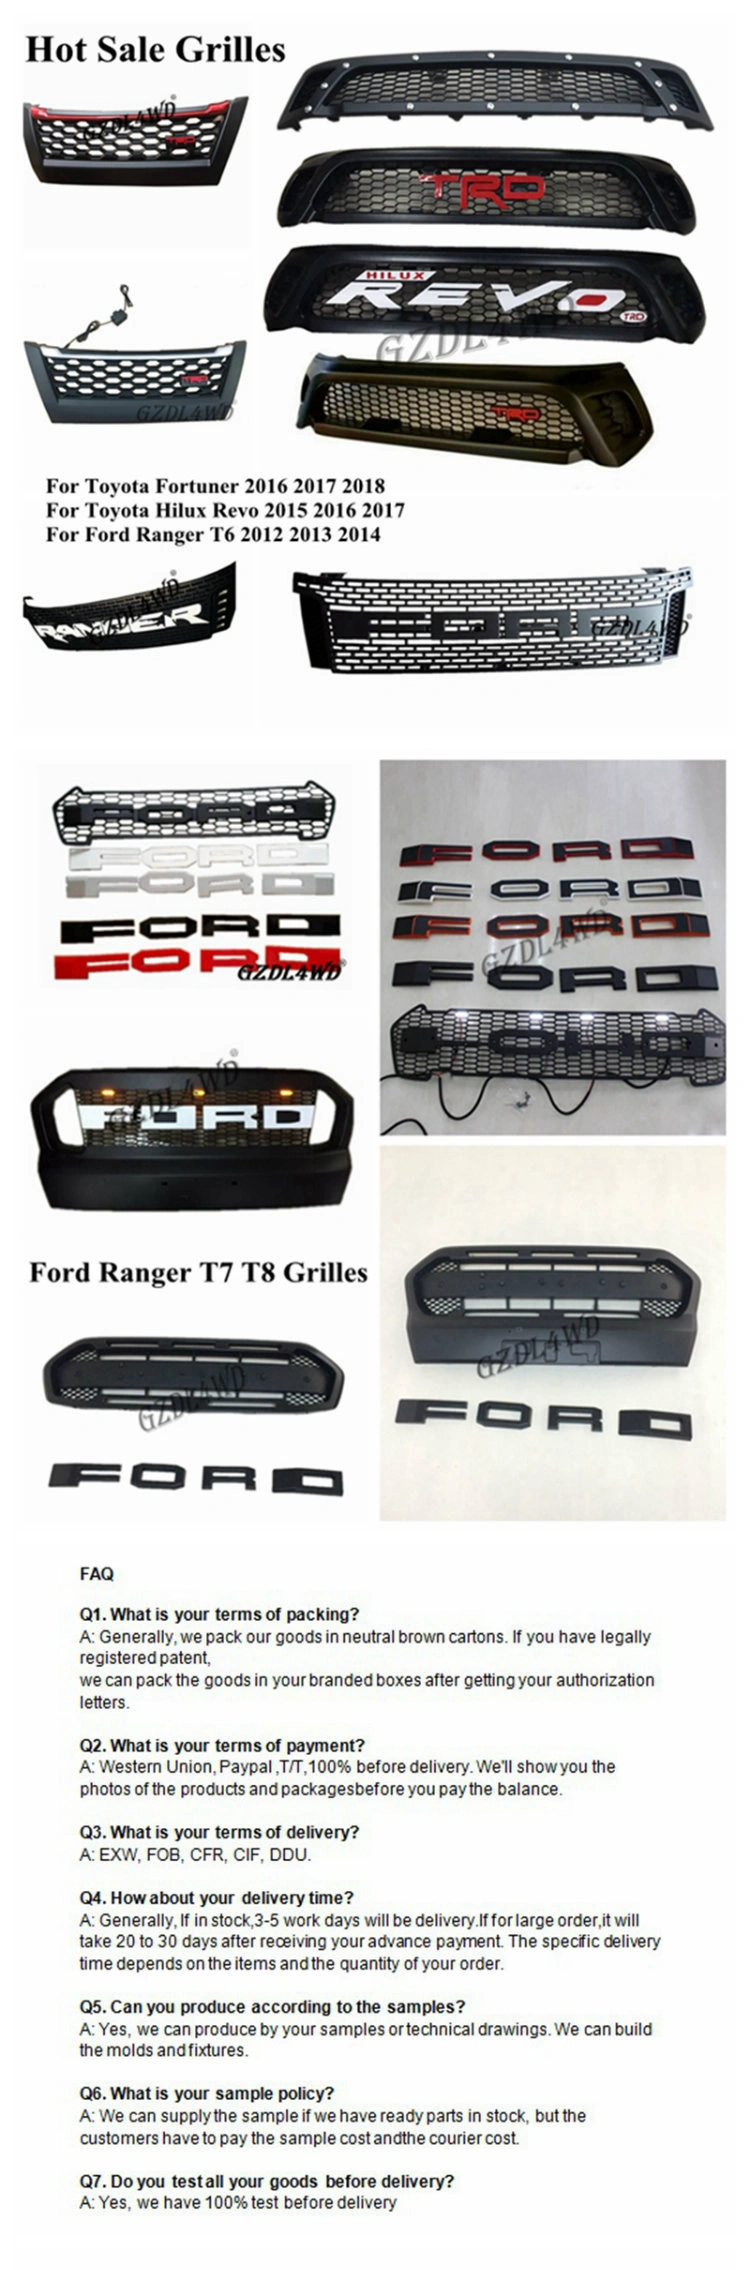 Red Grille for Ford Ranger T6 Px Wildtrak Raptor Grill 2012- 2014